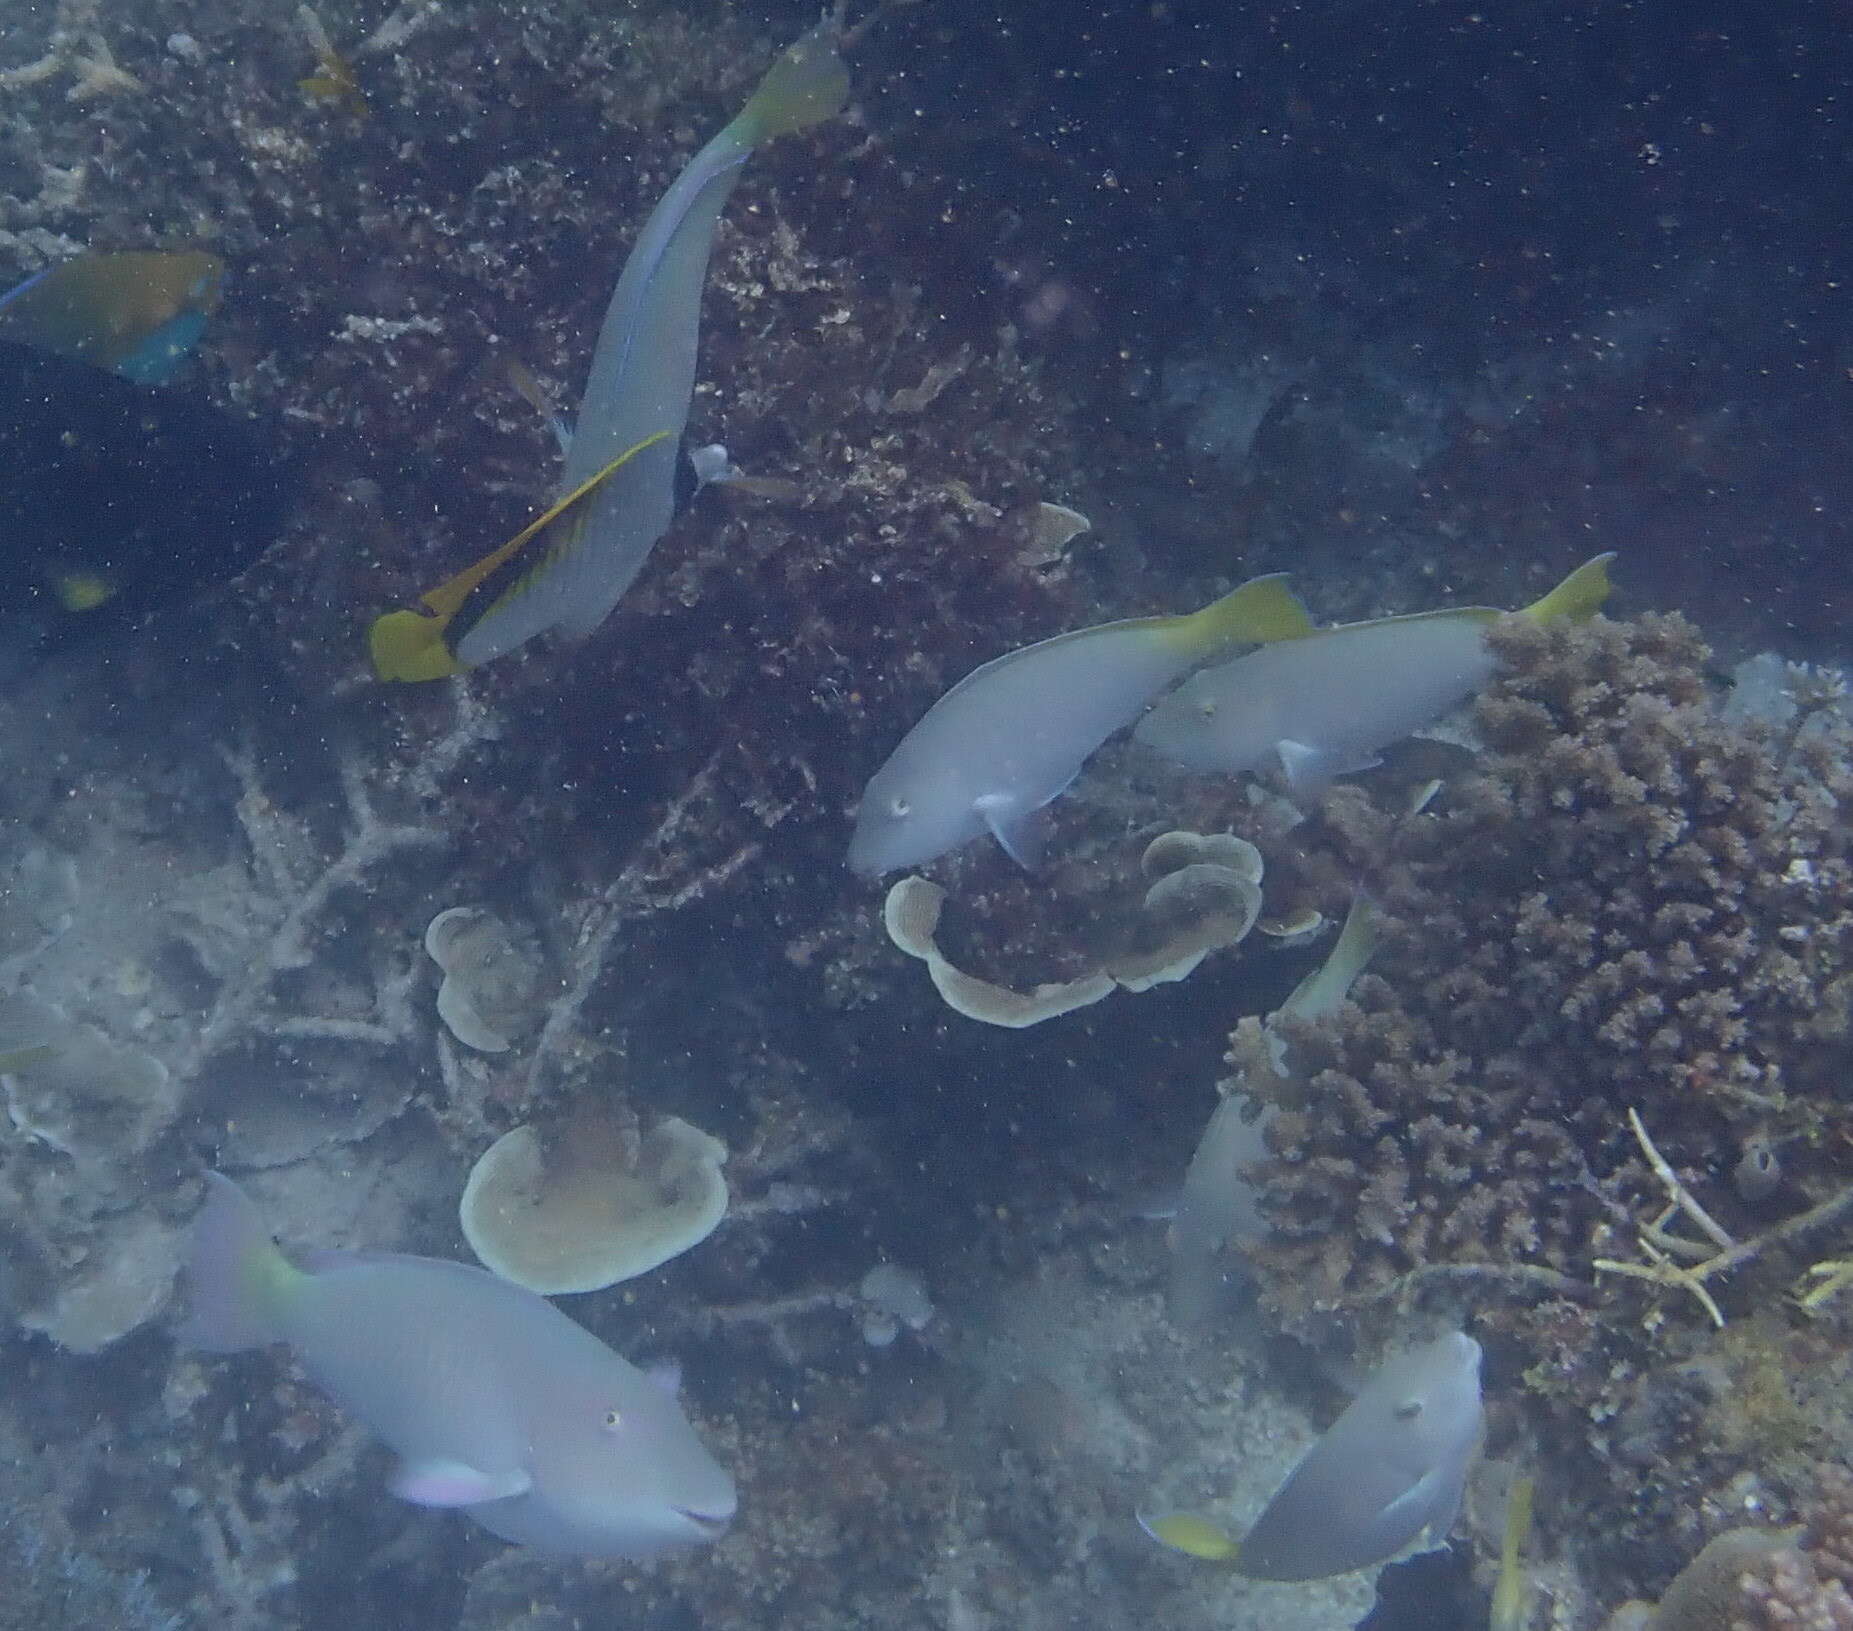 Image of Long-nosed Parrotfish